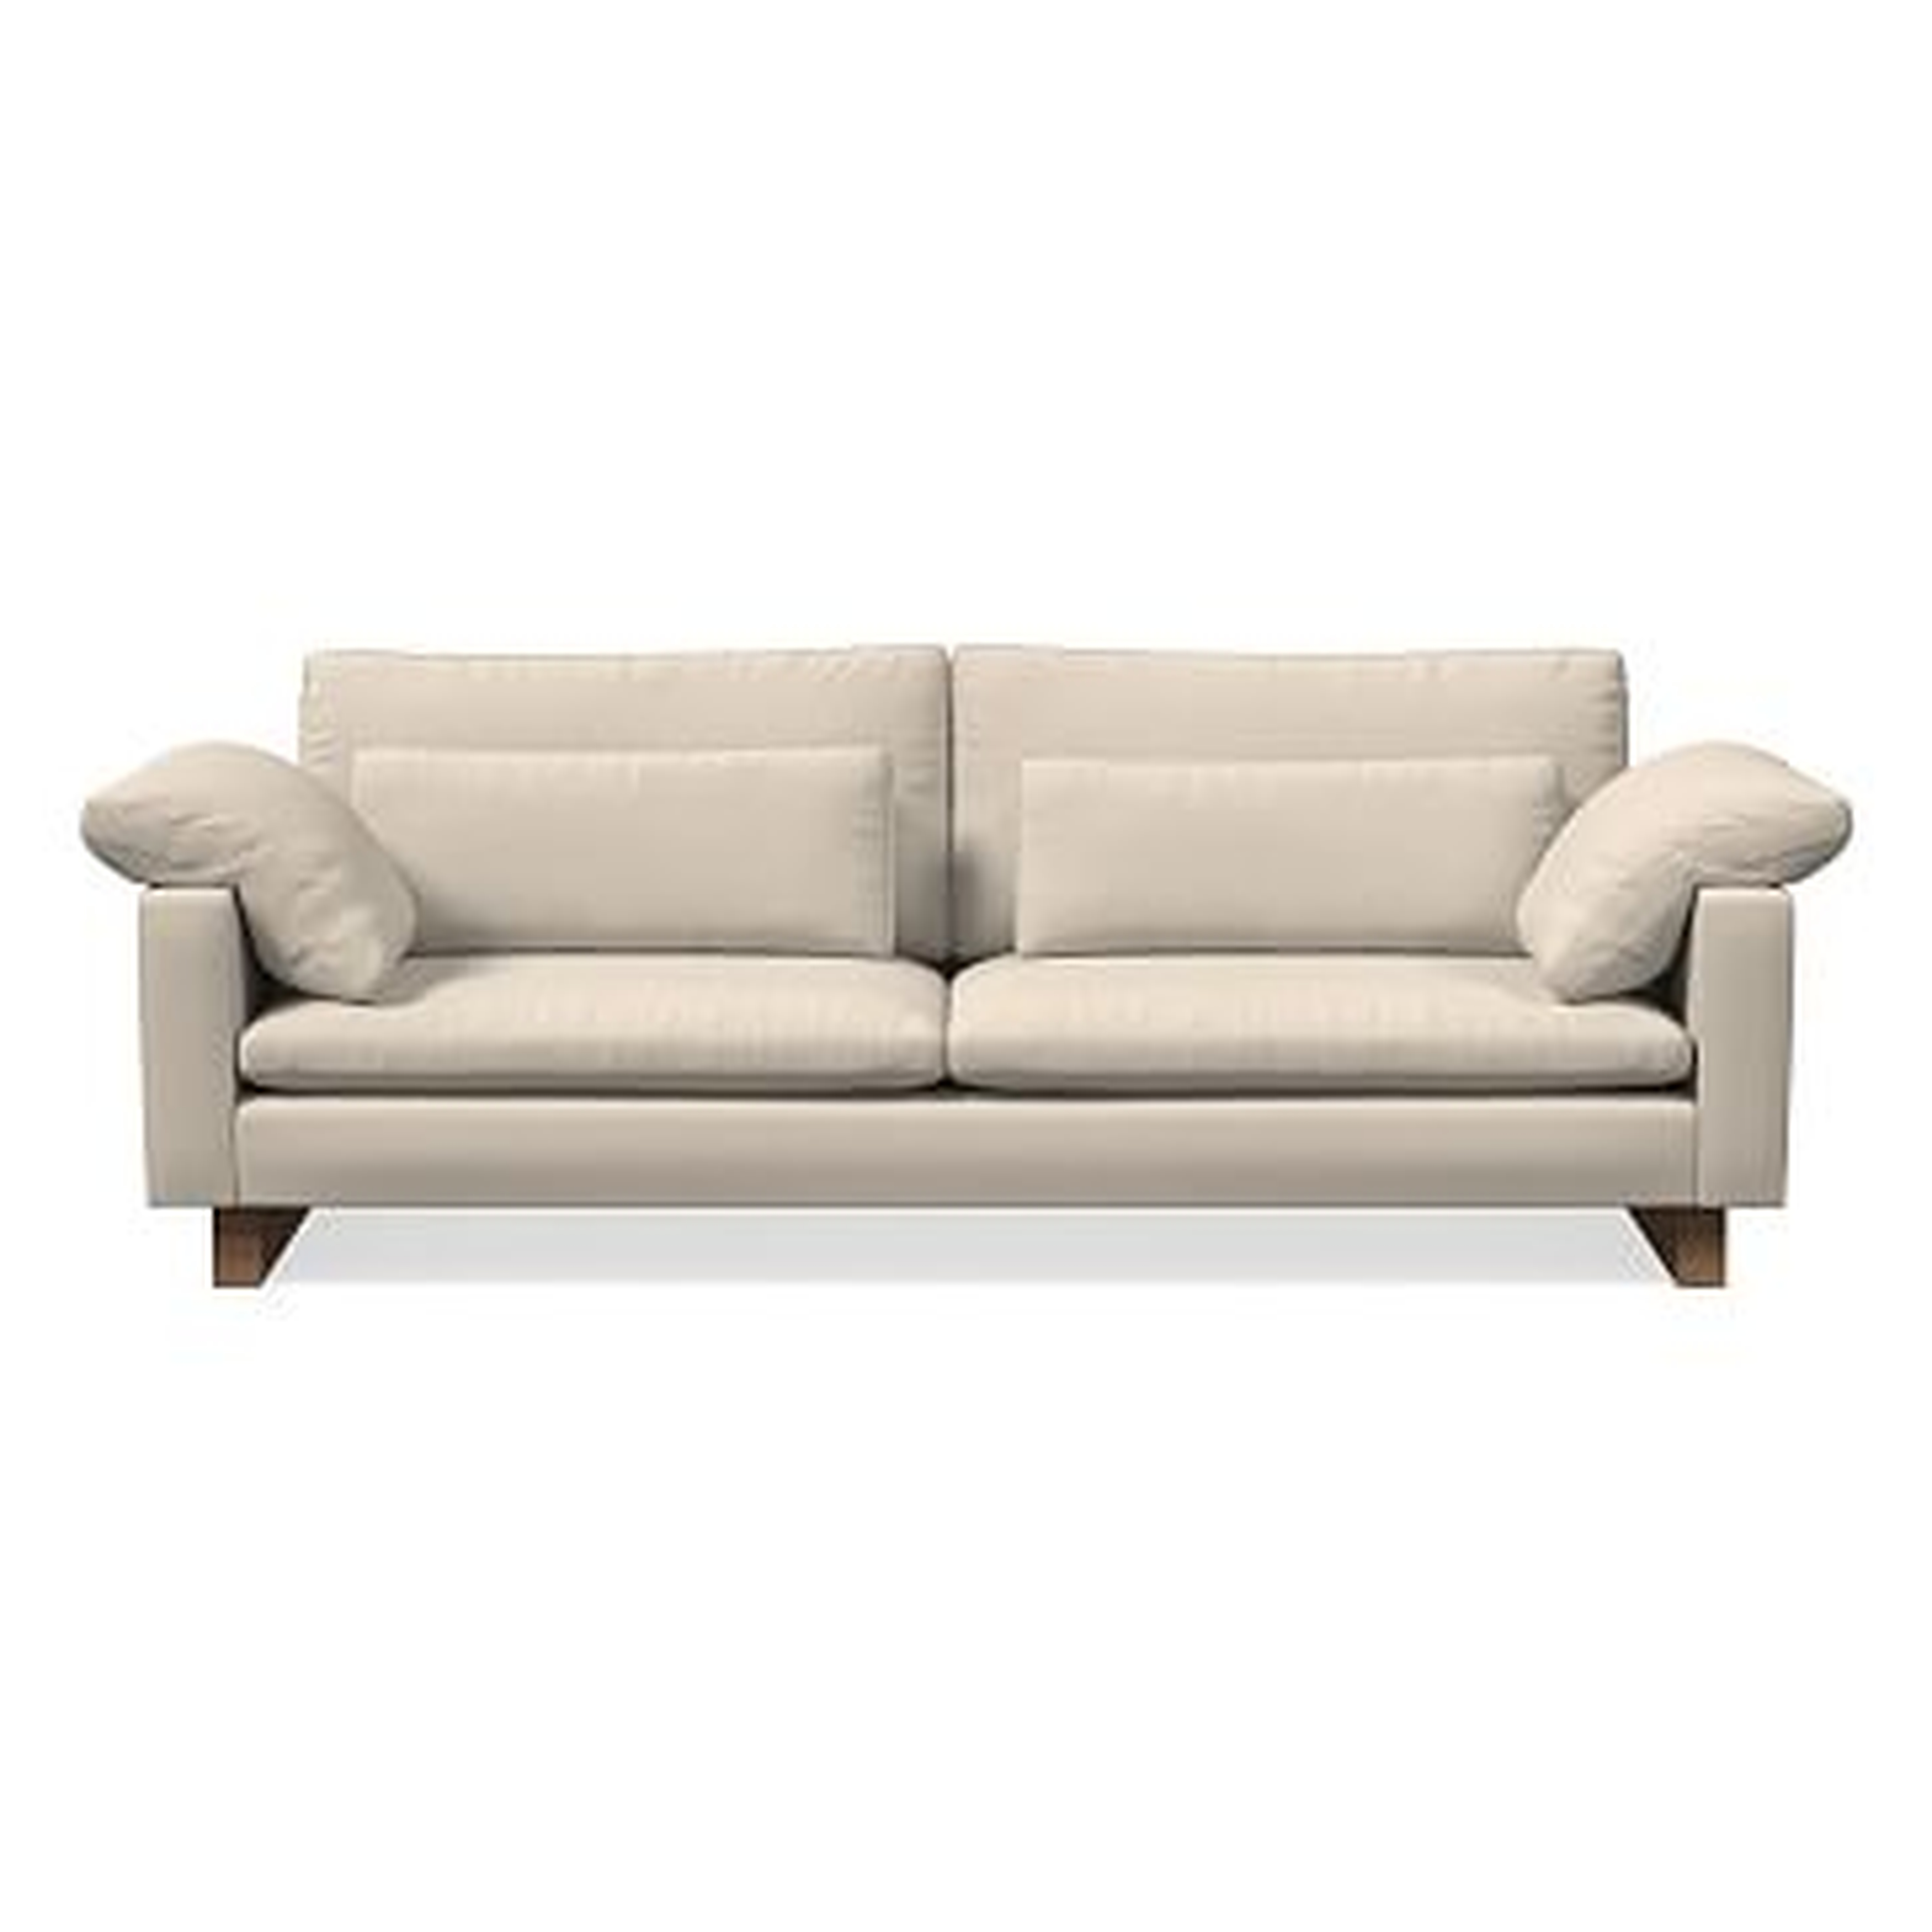 Harmony 92" Sofa, Down Blend, Performance Washed Canvas, Natural, Walnut - West Elm